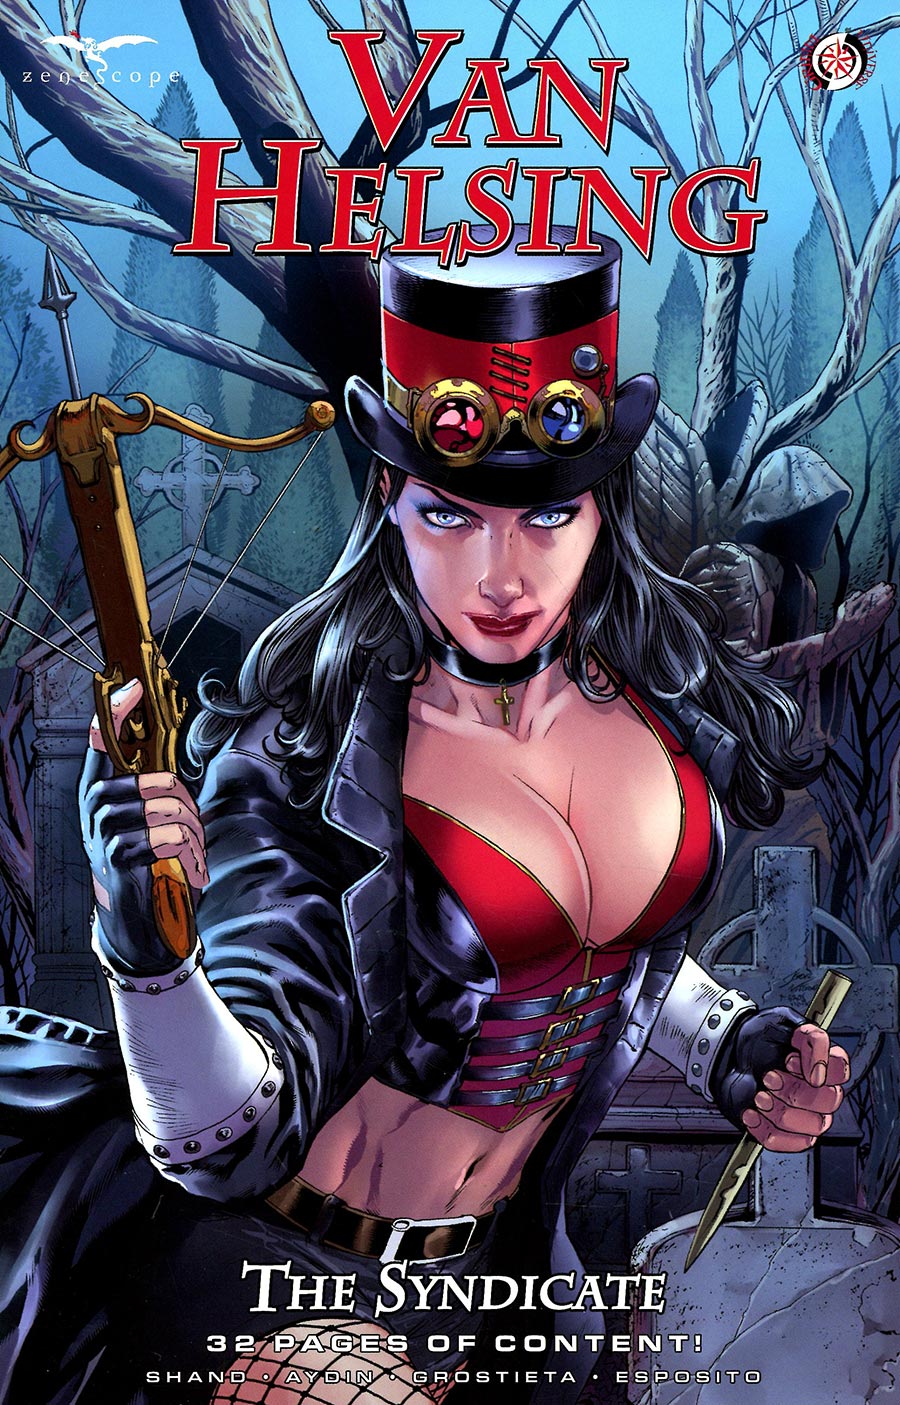 Grimm Fairy Tales Presents Van Helsing The Syndicate #1 (One Shot) Cover A Igor Vitorino